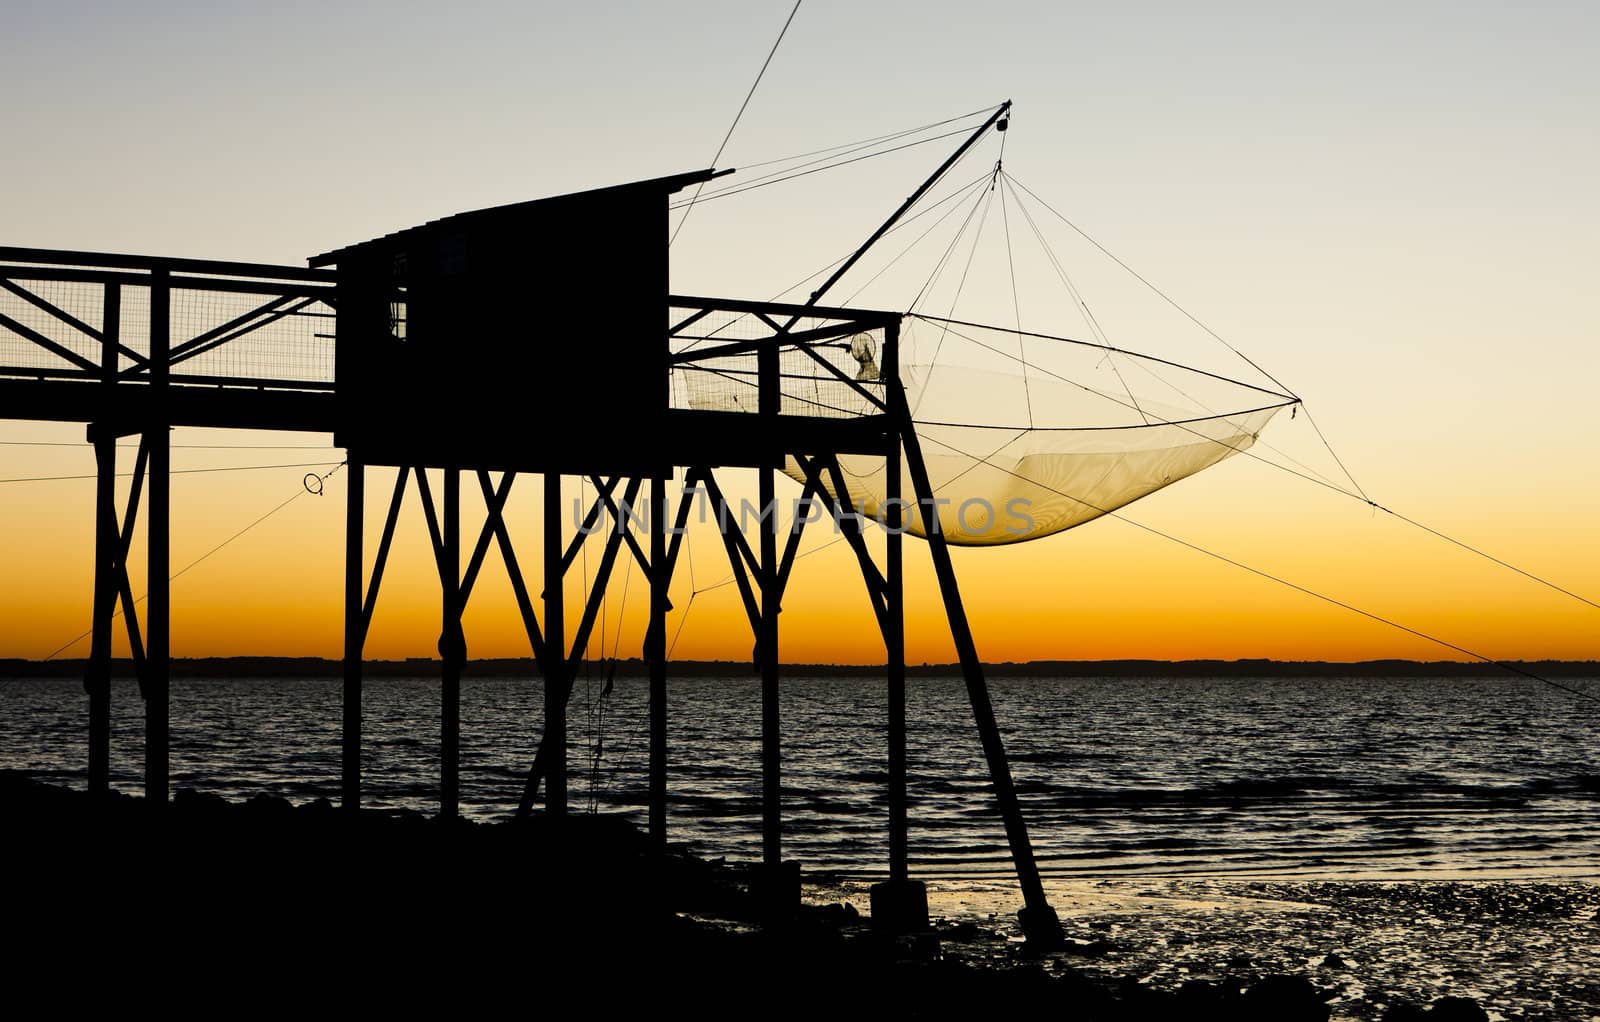 pier with fishing net during sunrise, Gironde Department, Aquitaine, France